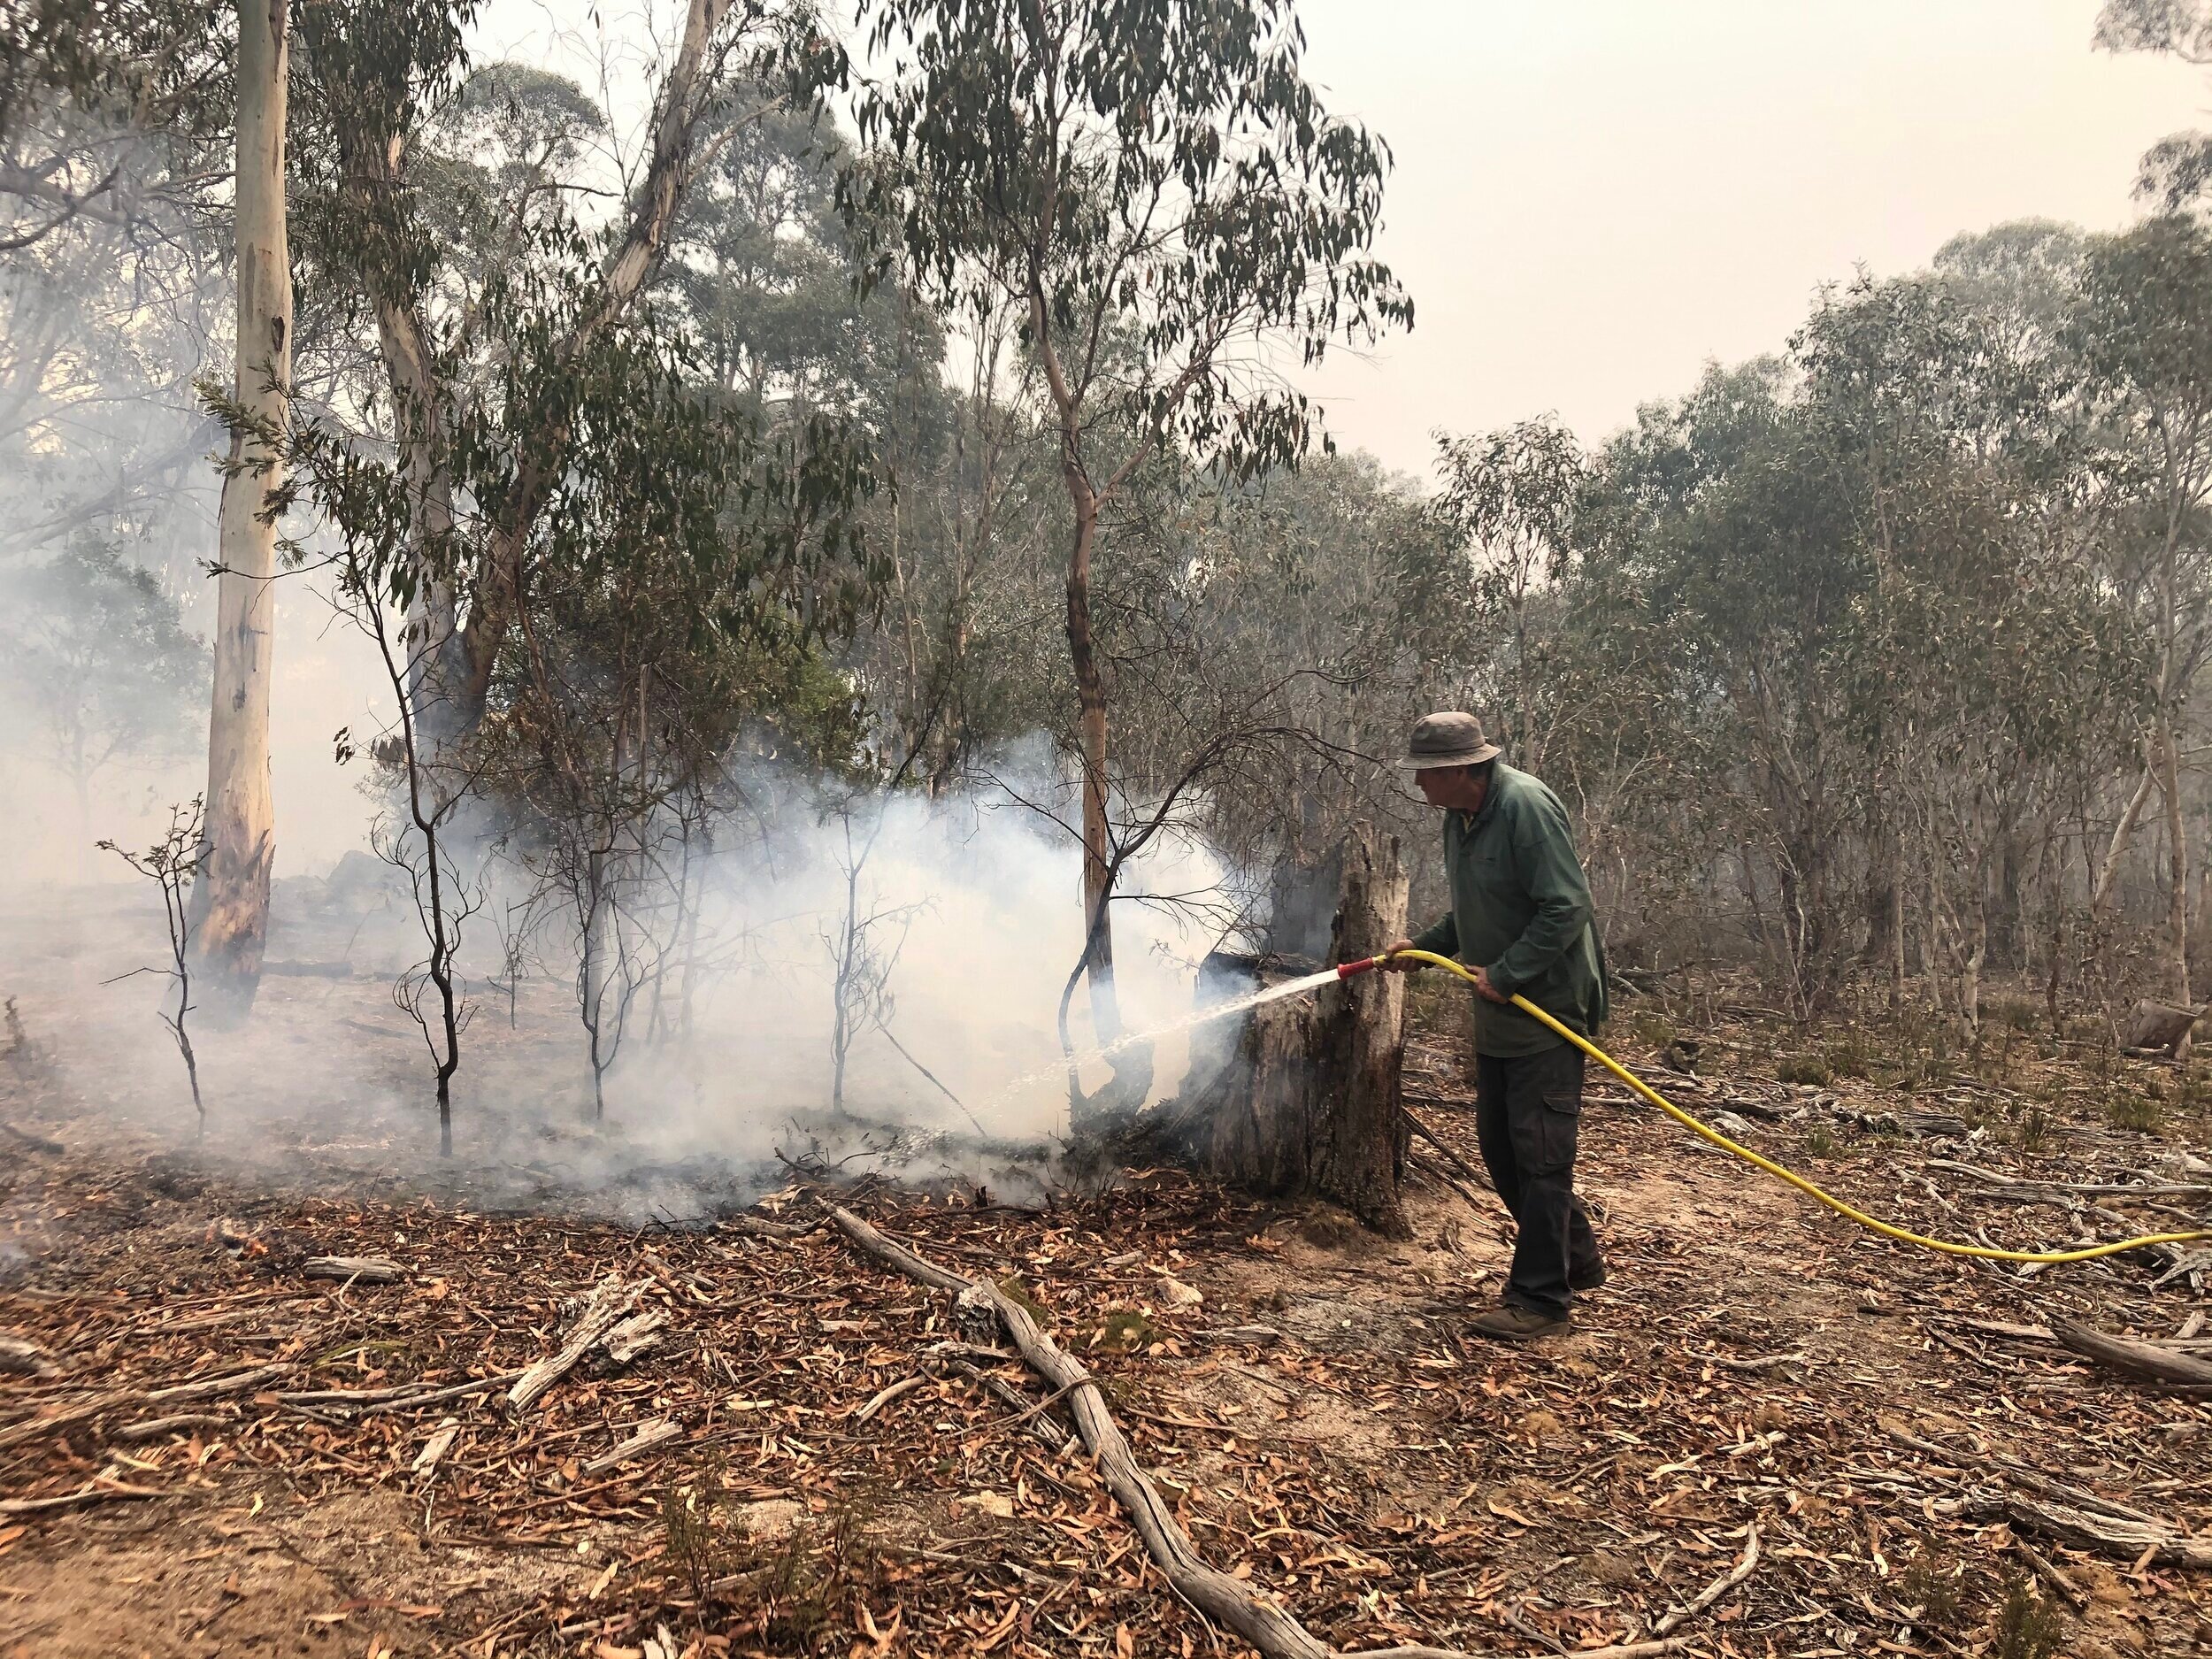         Photos courtesy of Yasmin Andrews ’22    Badjah farmer Pete Bohl, 81, has been driving around his property through out the disaster putting out fires to protect his paddocks.  